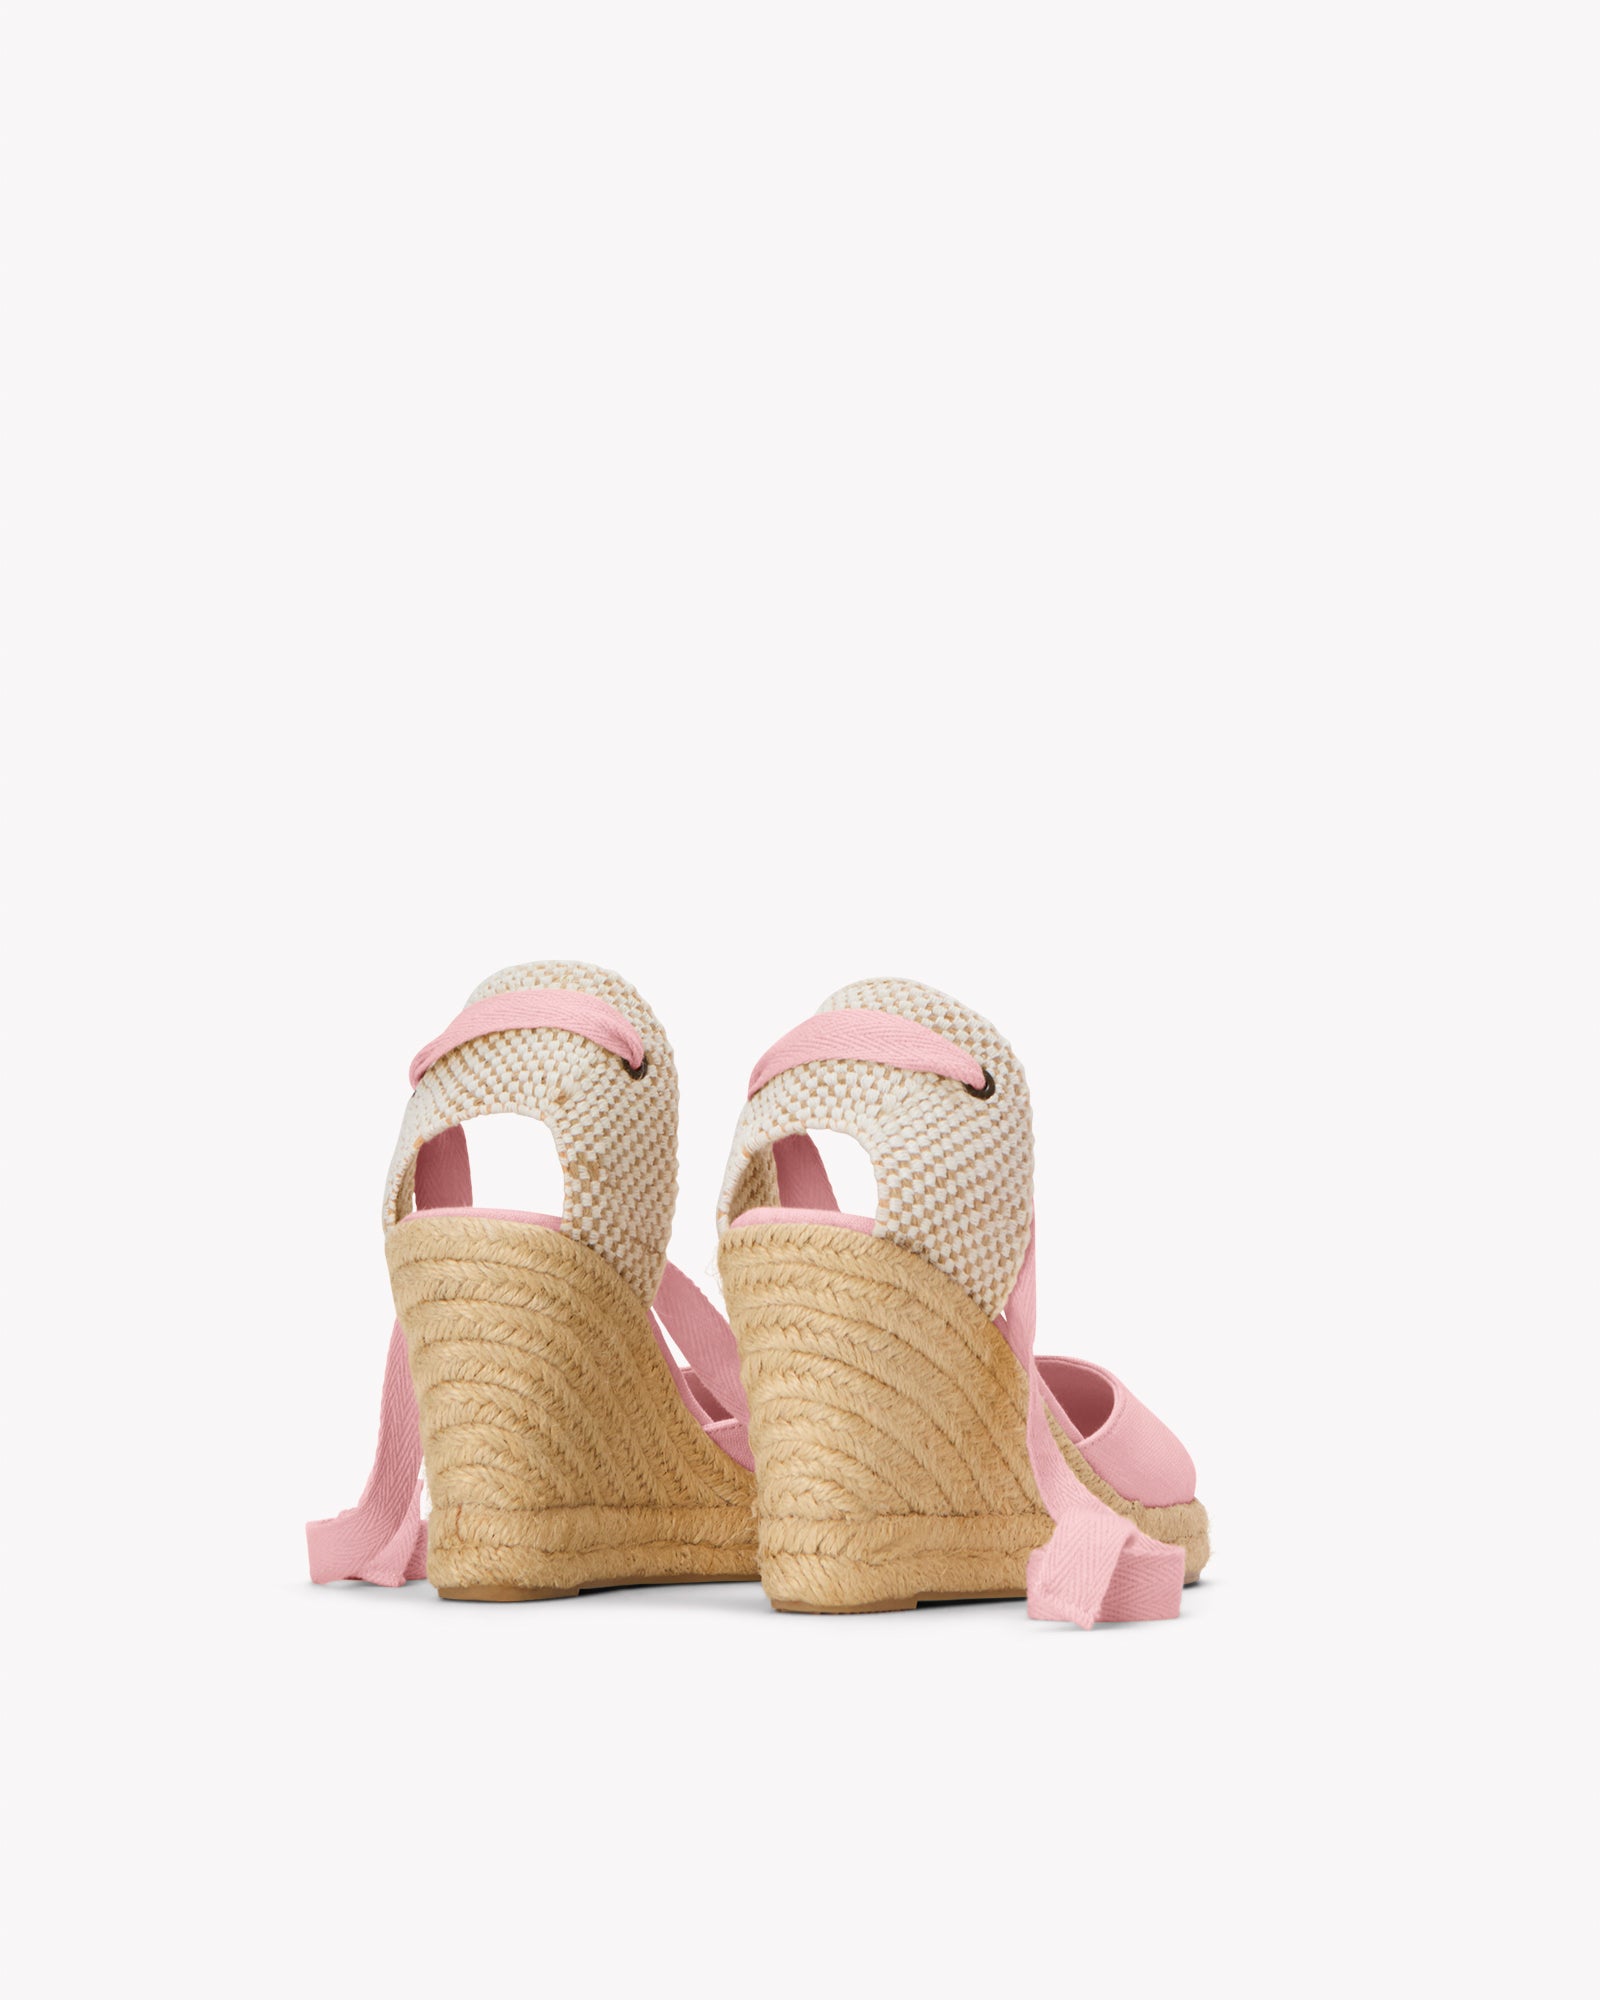 The Marseille Wedge - Classic - Rosa Pink